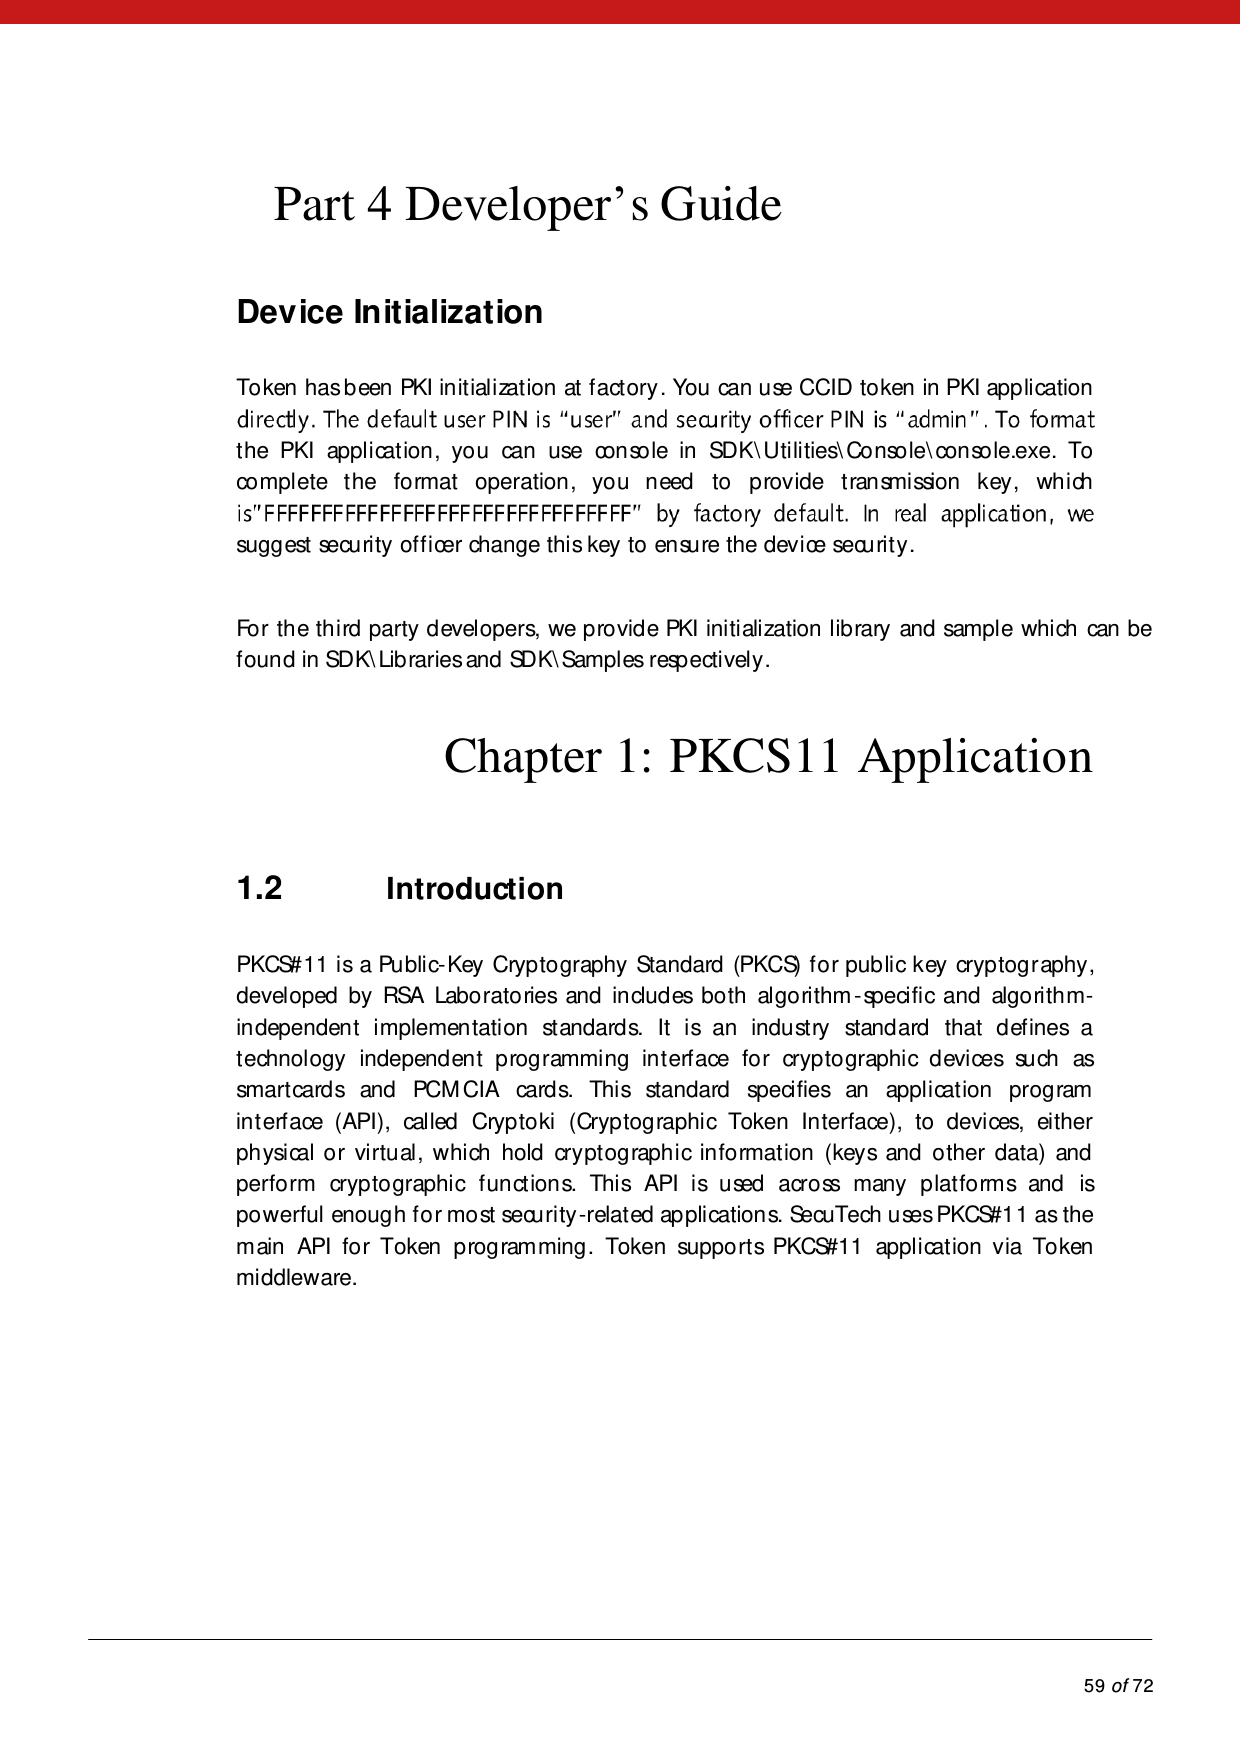            59 of 72  Part 4 Developer’s Guide Device Initialization Token has b een PKI initialization at f actory . You can use CCID token in PKI application the PKI application, you can use console in SDK\U ti li ties\Console\console.exe. To complete the format operation, you need to provide transmission key, which suggest security officer change this key to ensure the device security.  For the third party developers, we provide PKI initialization library and sample which can be found in SDK\Libraries and SDK\Samples respectively.  Chapter 1: PKCS11 Application 1.2 Introduction PKCS#11 is a Public-Key Cryptography Standard (PKCS) for public key cryptography, developed by RSA Laboratories and includes both algorithm -specifi c and  algo ri th m-independent implementation standards. It is an industry standard that defines a technology independent programming interface for cryptographic devices such as smartcards  and PCM CIA cards. This standard specifies an application program in t erf ace (API), cal led  Cryp to ki  (Cryp tog raphi c Token In terface), to  devi ces, either physical or virtual, which hold cryptographic information (keys and other data) and perform cryptographic functions. This API is used across many platforms and is powerful enough for most security-related applications. SecuTech uses PKCS#11 as the main API for Token programming.  Token supports PKCS#11 application via Token middleware. 